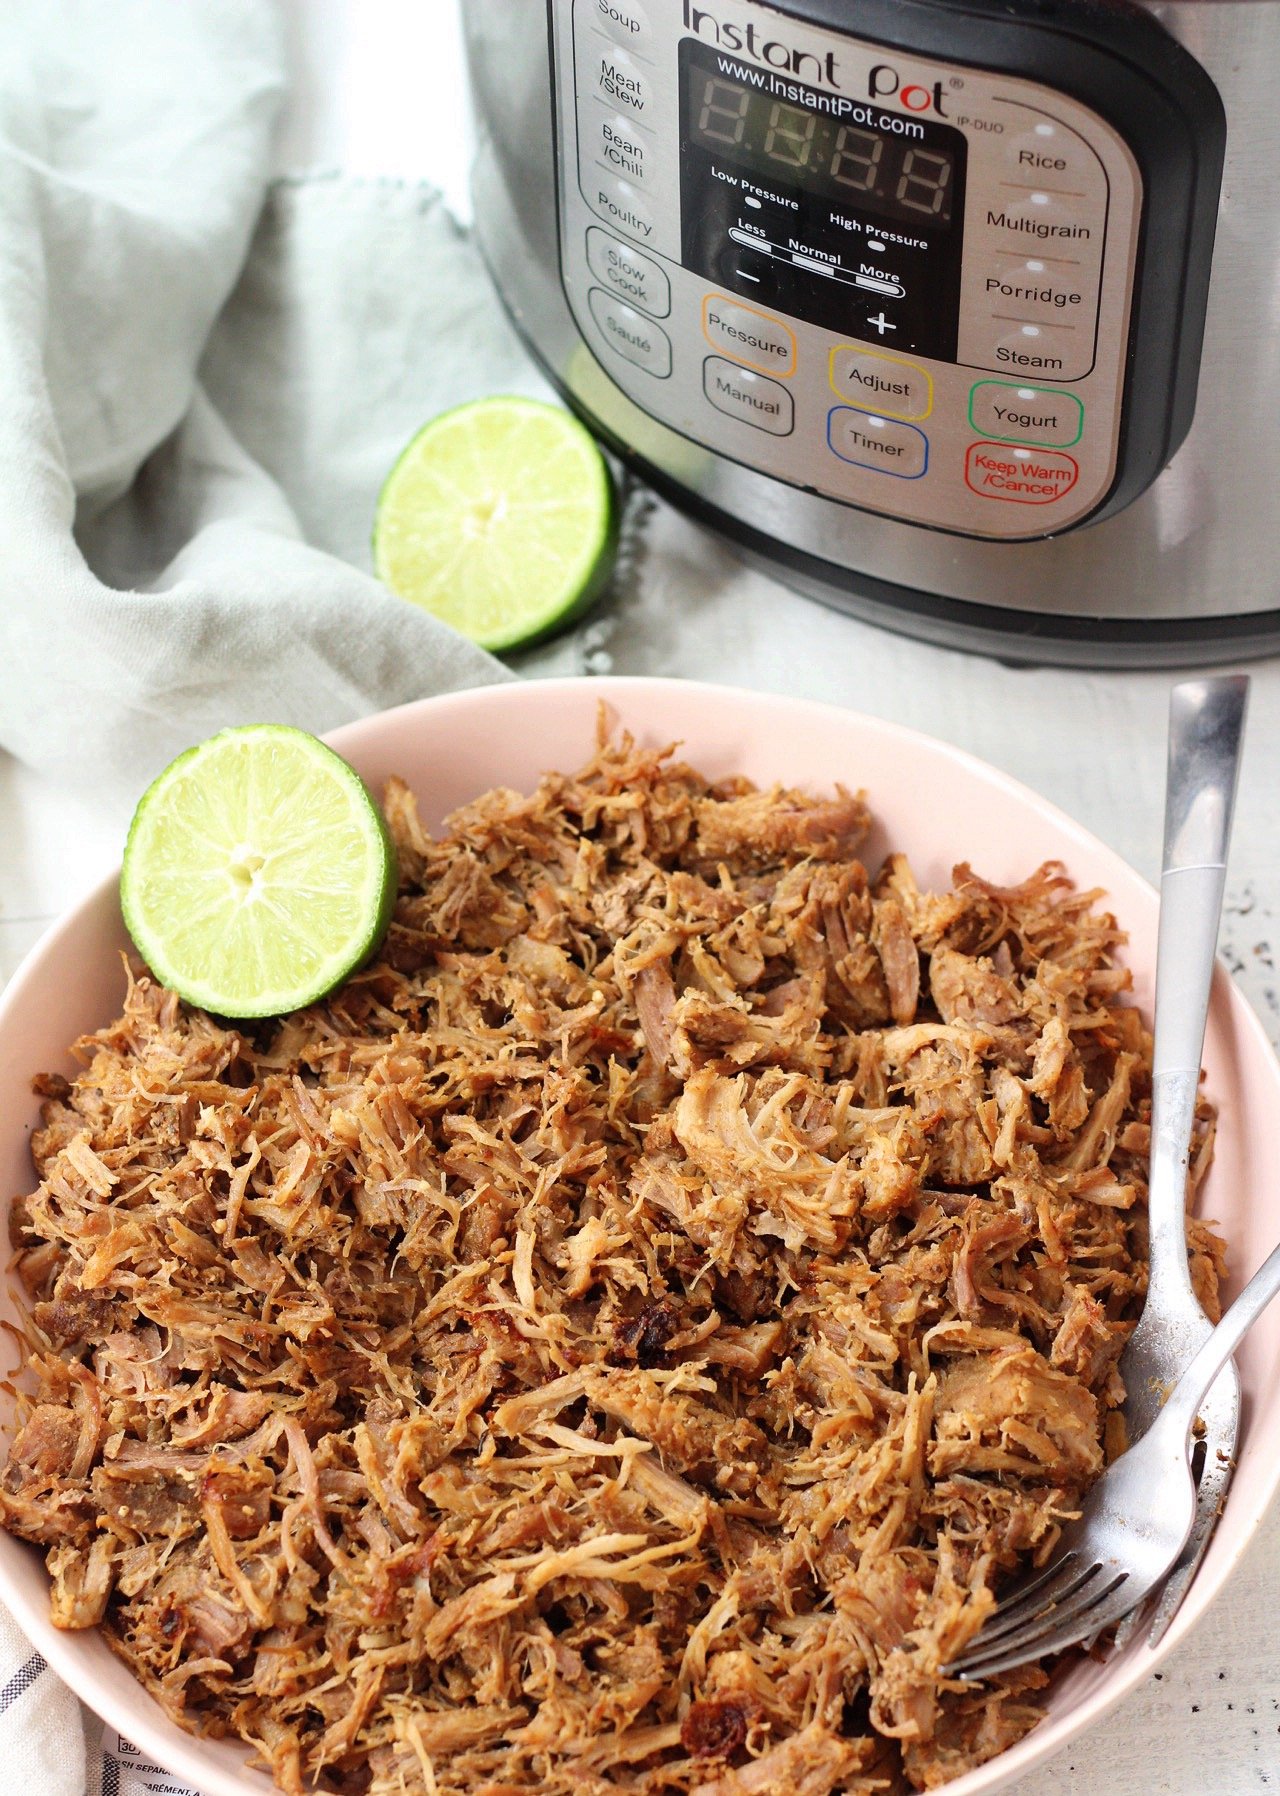 Easy Whole30 and Paleo instant pot pork carnitas only take a few simple ingredients and less than an hours time to cook perfectly! This is a great whole30 pork recipe for meal prep, or as a family friendly recipes for tacos or burritos! #paleocarnitas #whole30instantpot #whole30carnitas